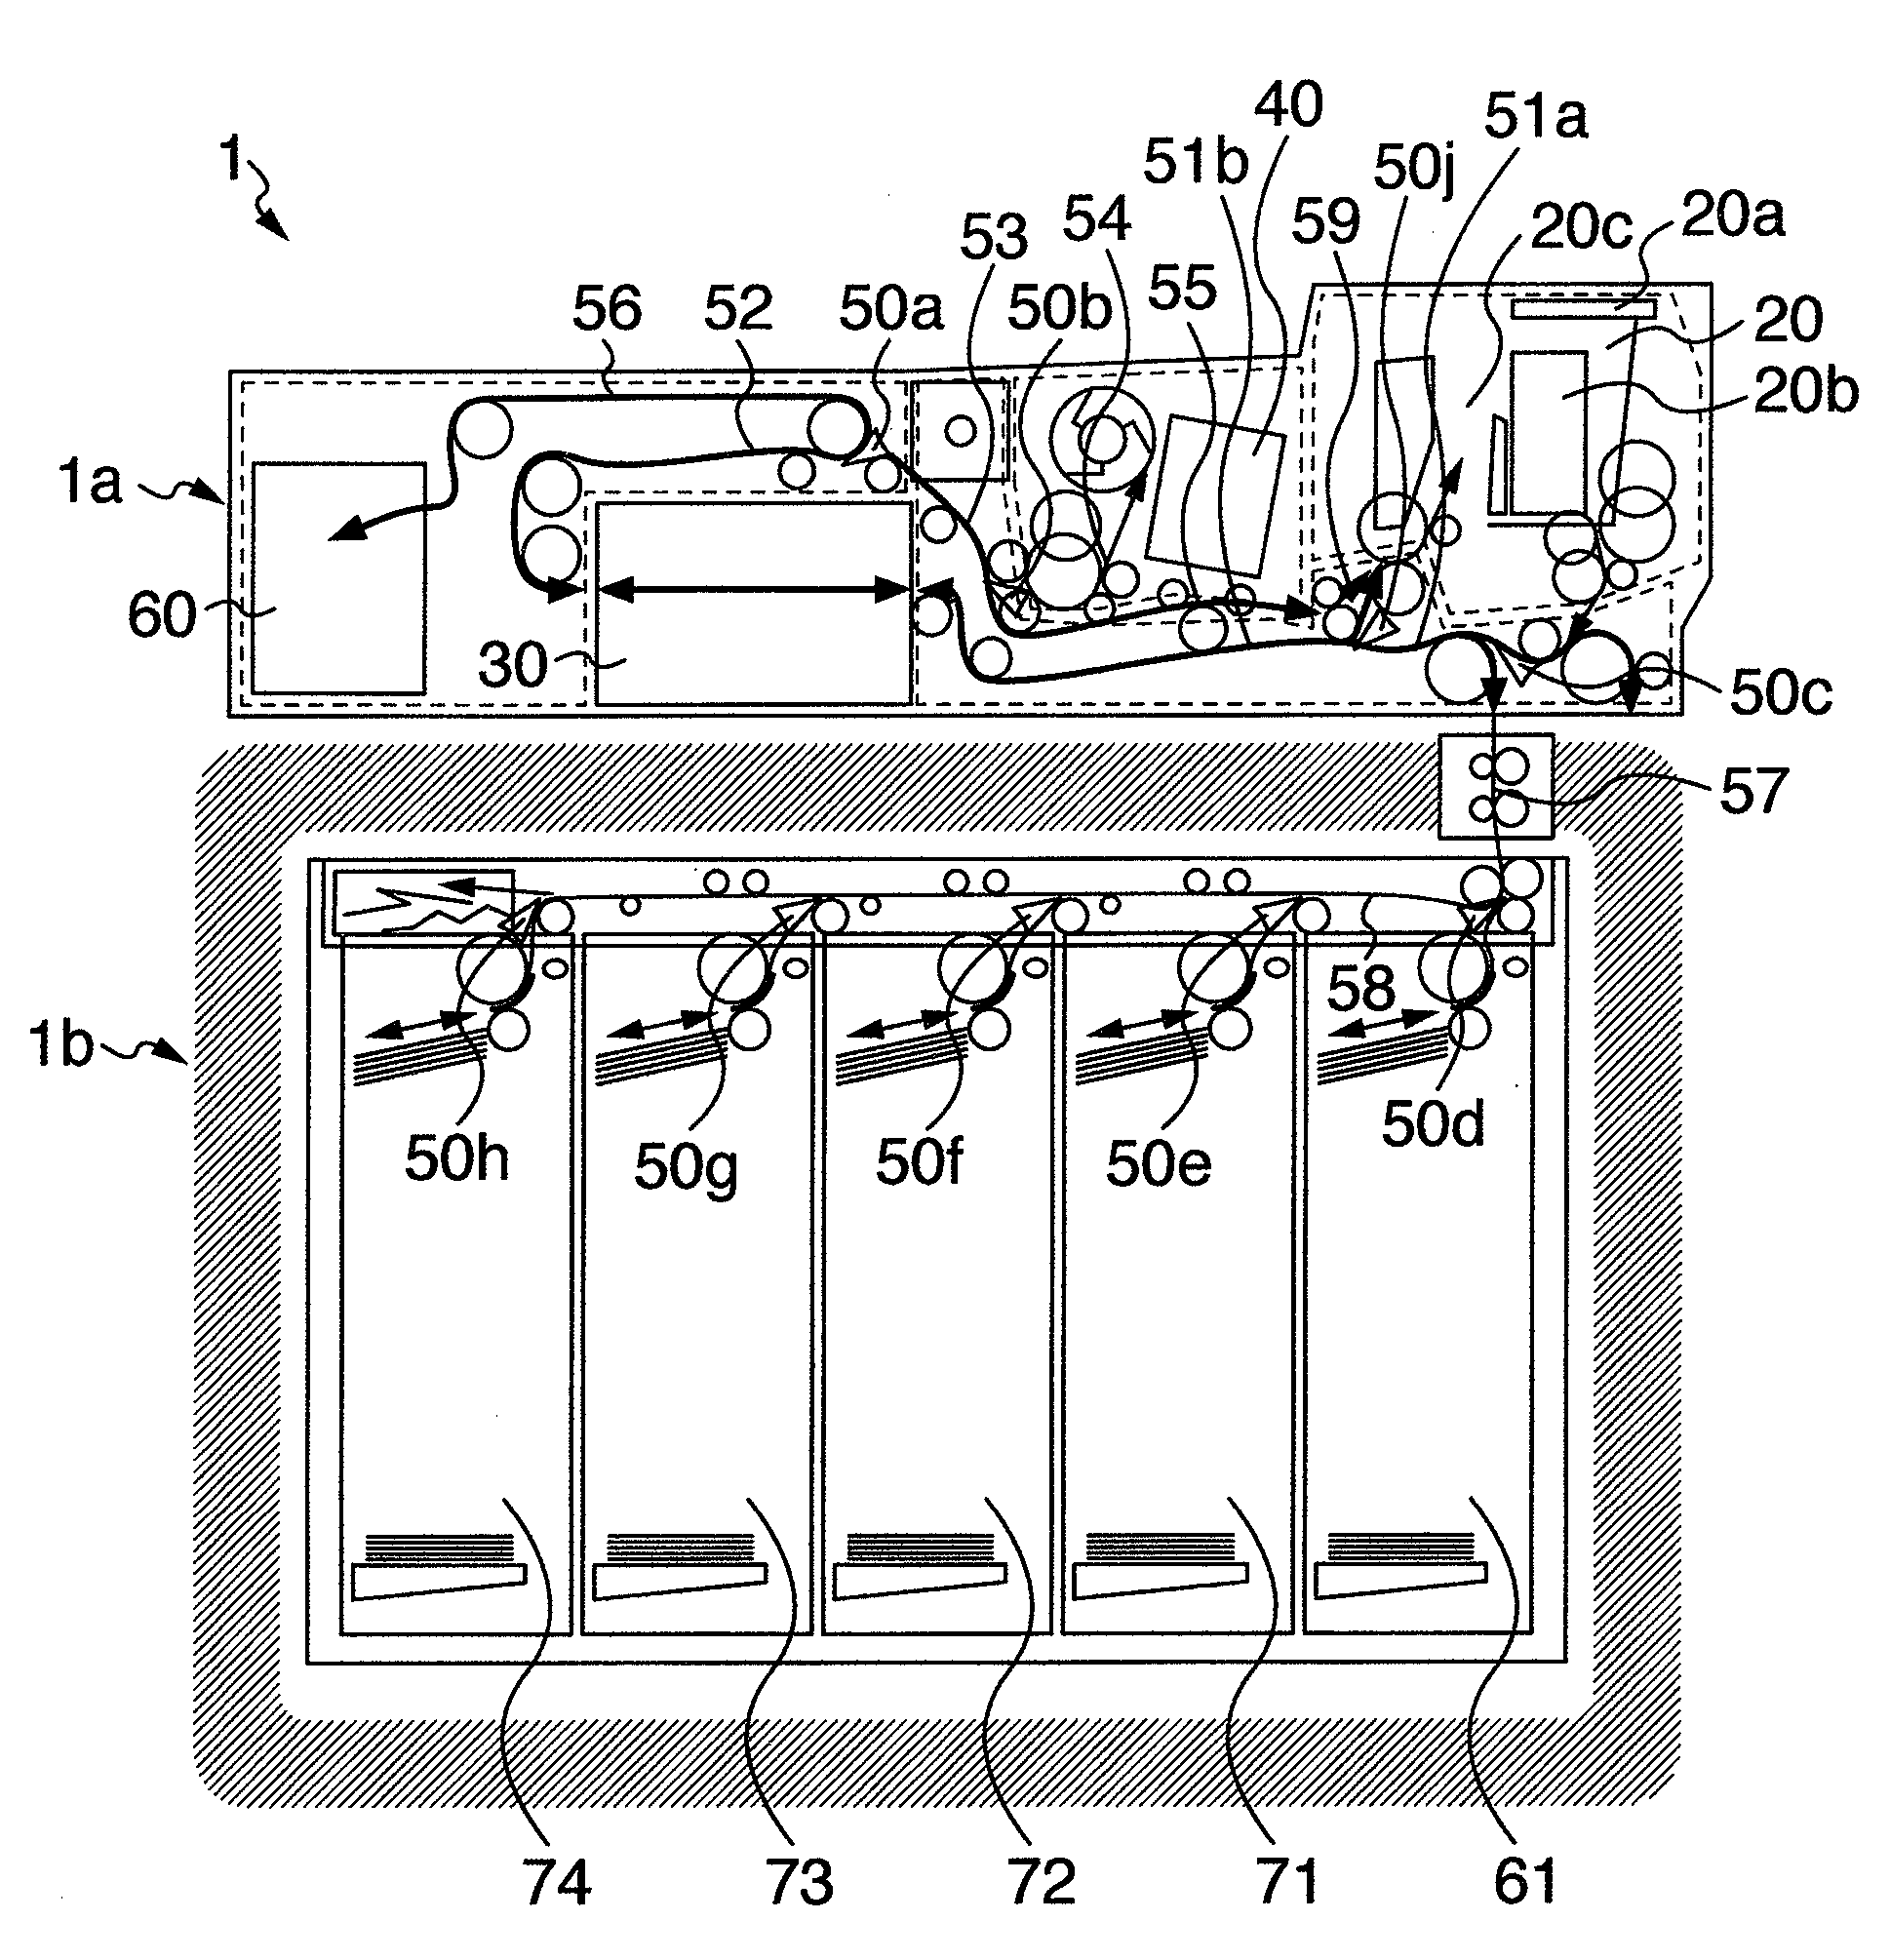 Paper Currency Handling Apparatus